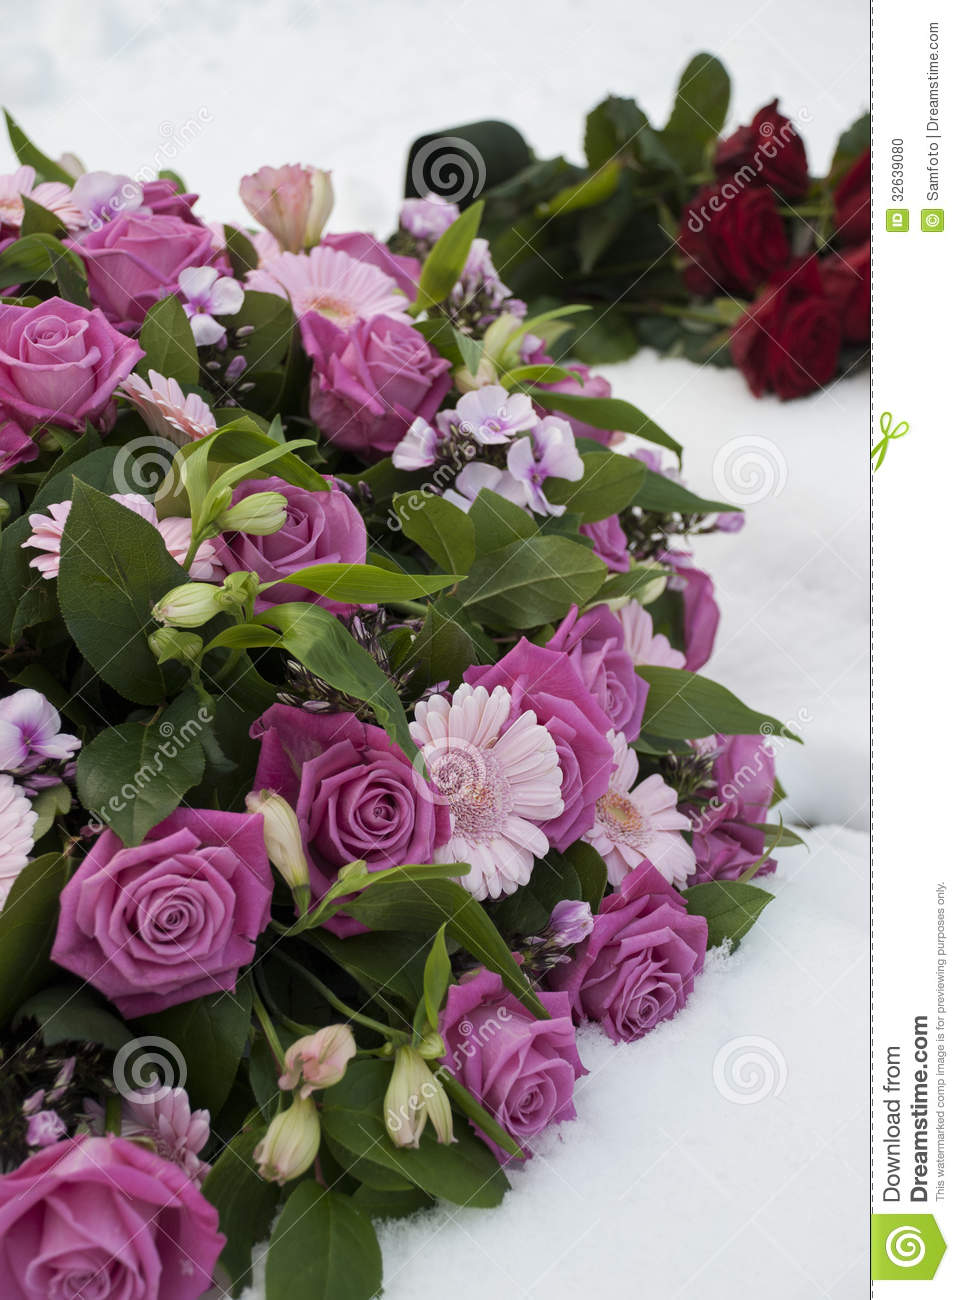 Pink Funeral Flowers Arrangement And Red Roses In The Snow At The